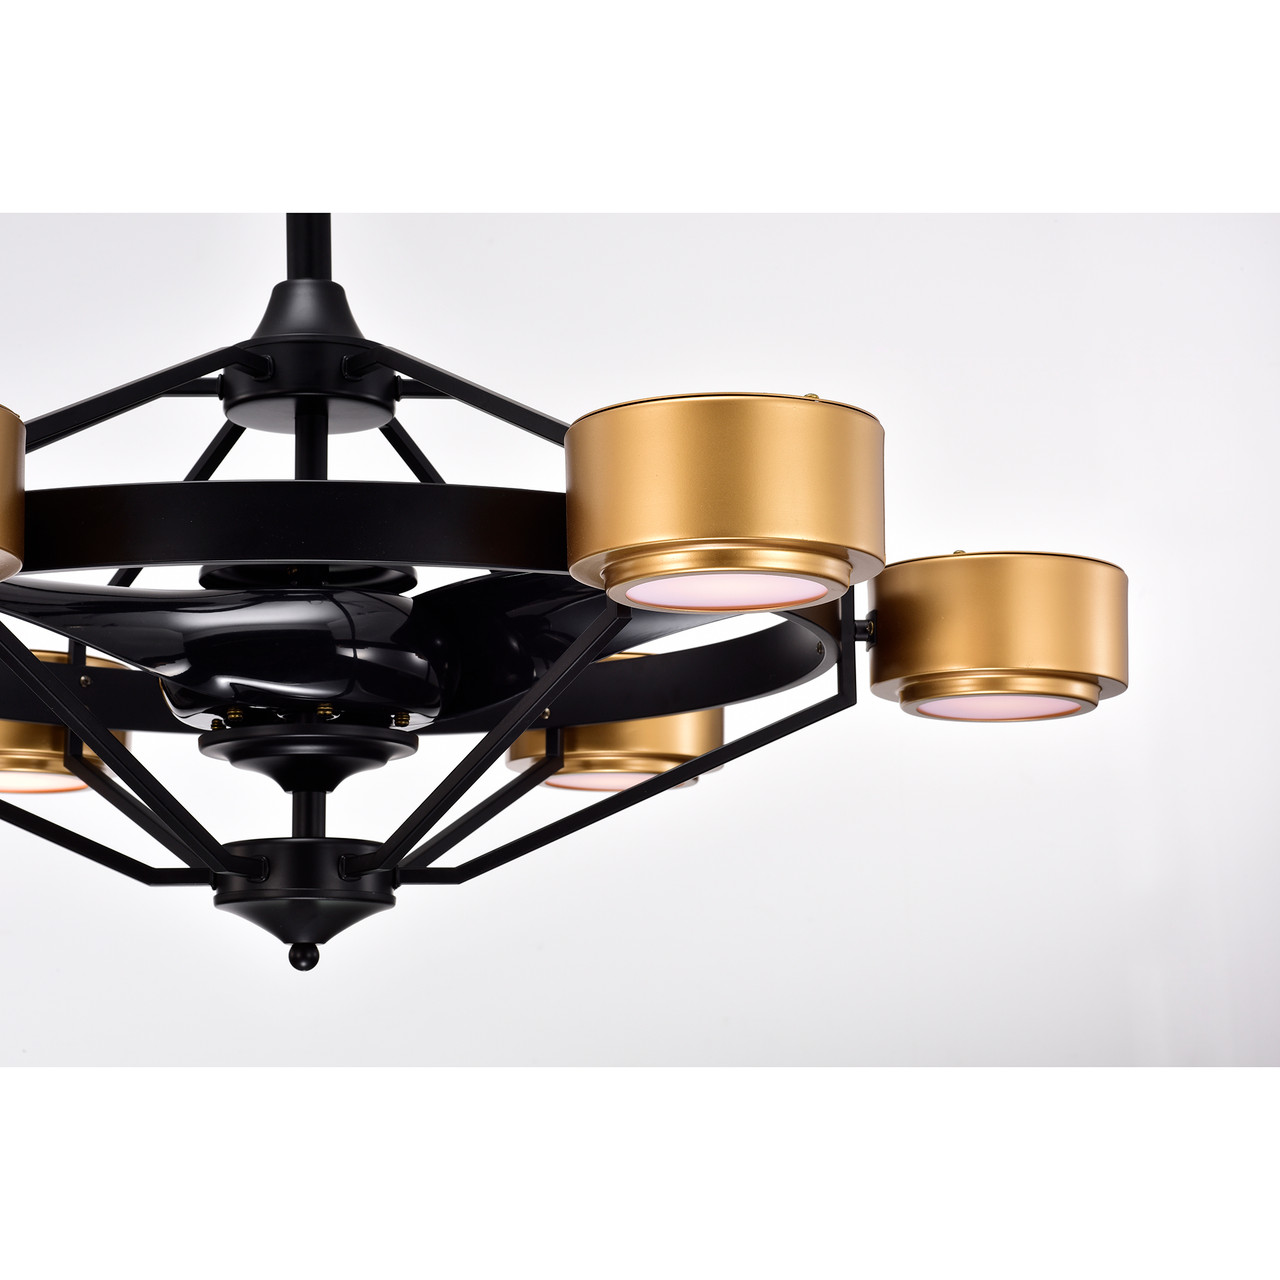 WAREHOUSE OF TIFFANY'S CFL-8495/MG Larissa 37 in. 6-Light Indoor Matte Black and Gold Finish Ceiling Fan with Light Kit